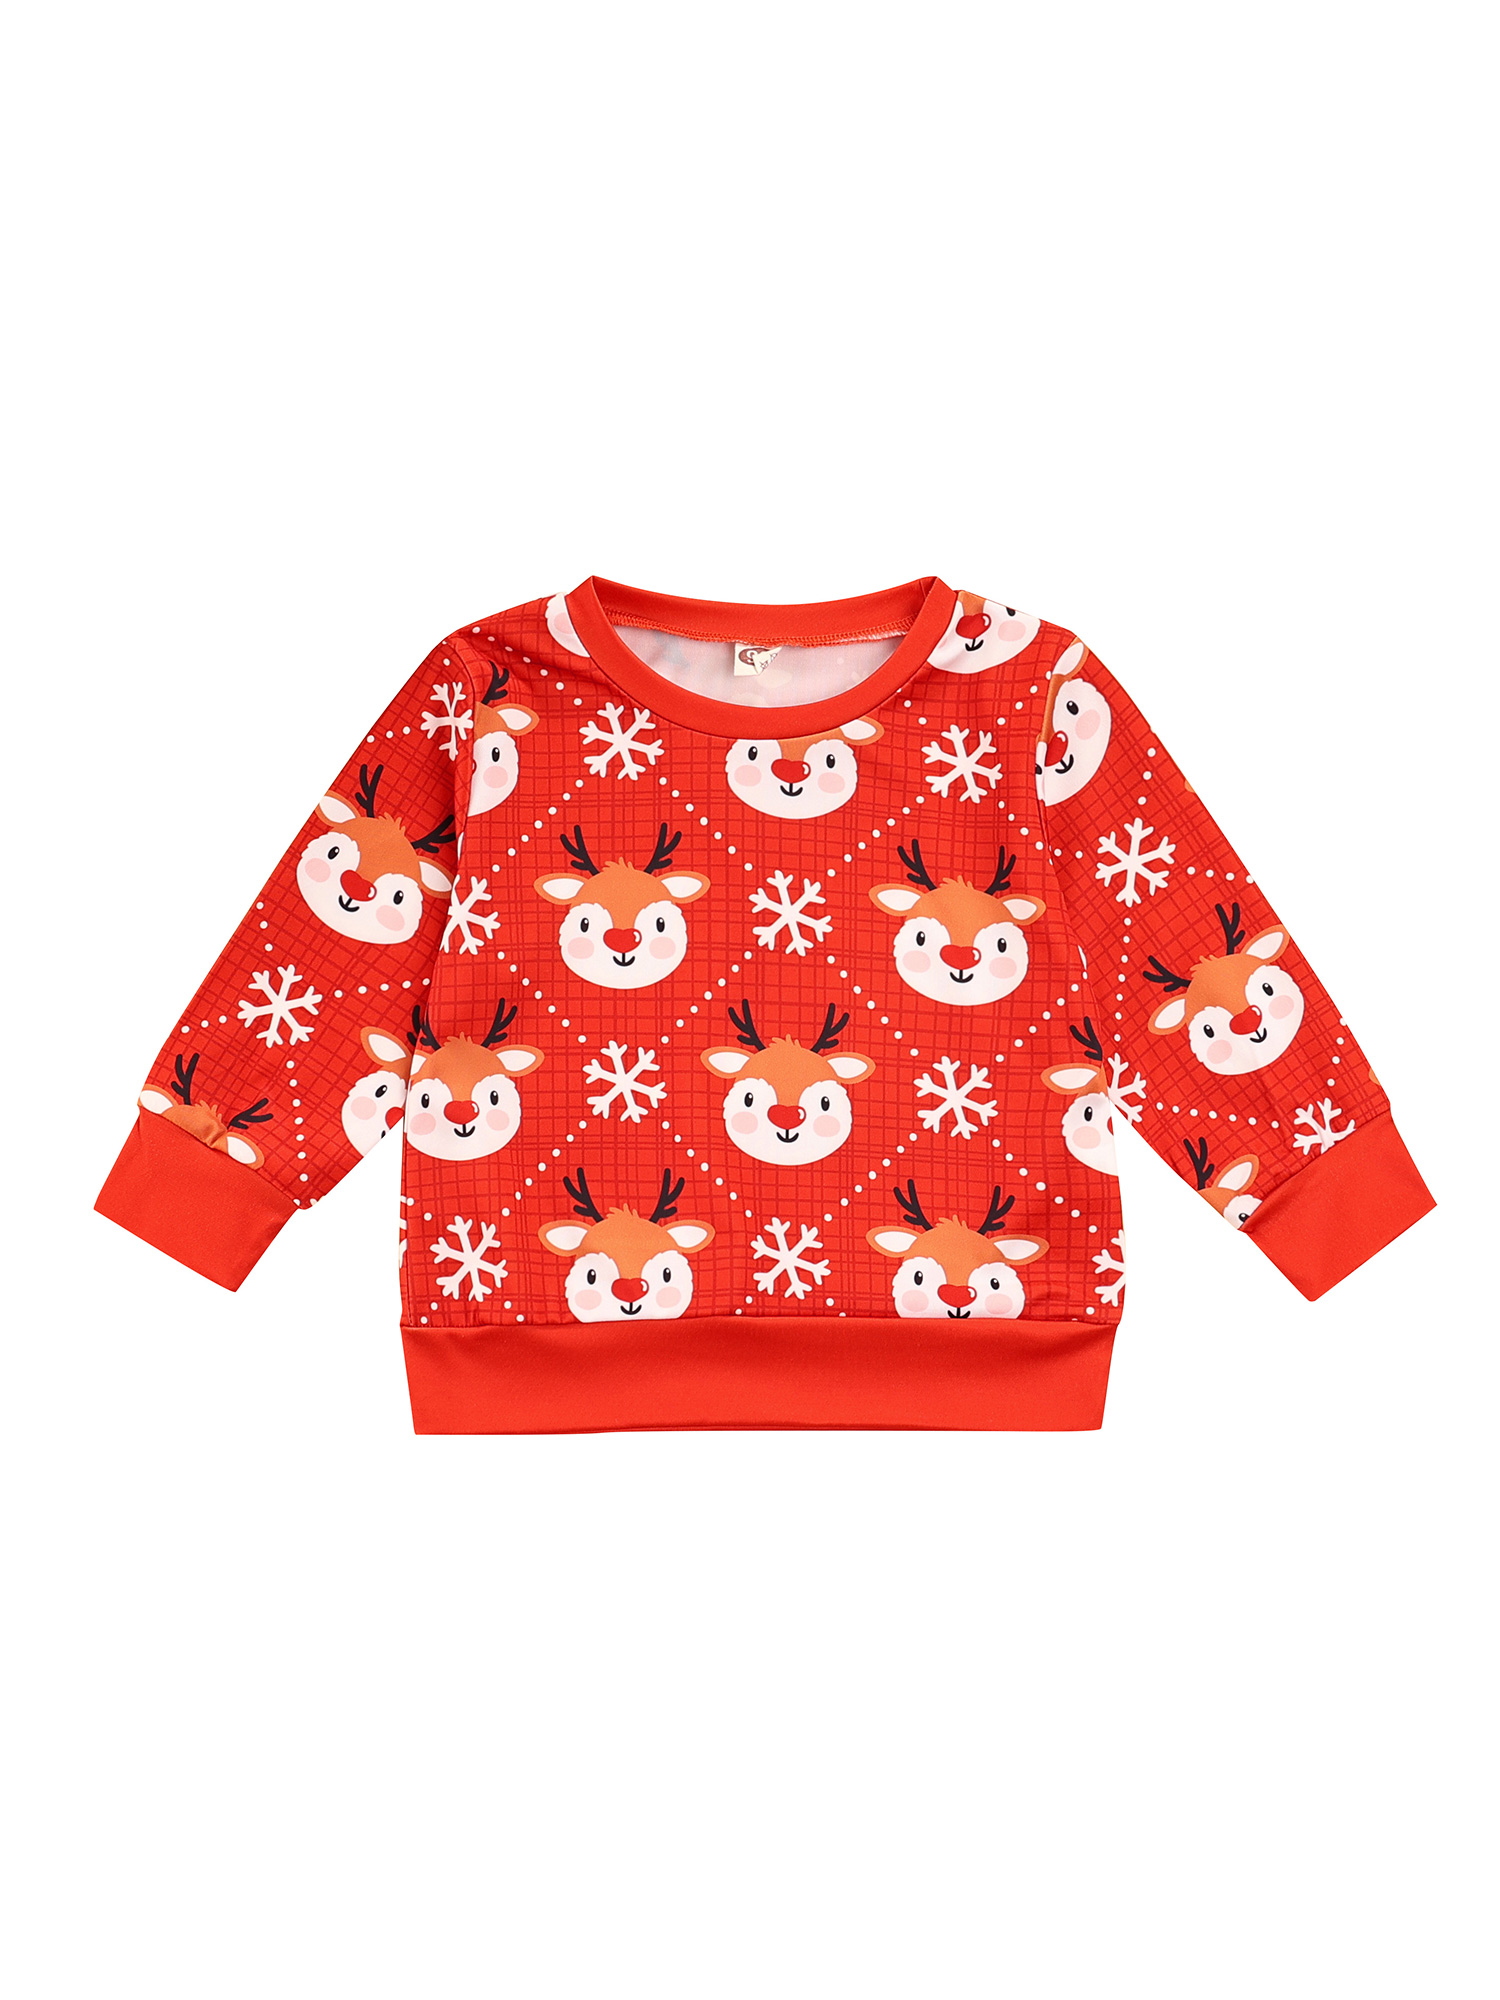 Beautymei Baby Boy Christmas Sweater Toddler Boys Reindeer Pullover Clothes